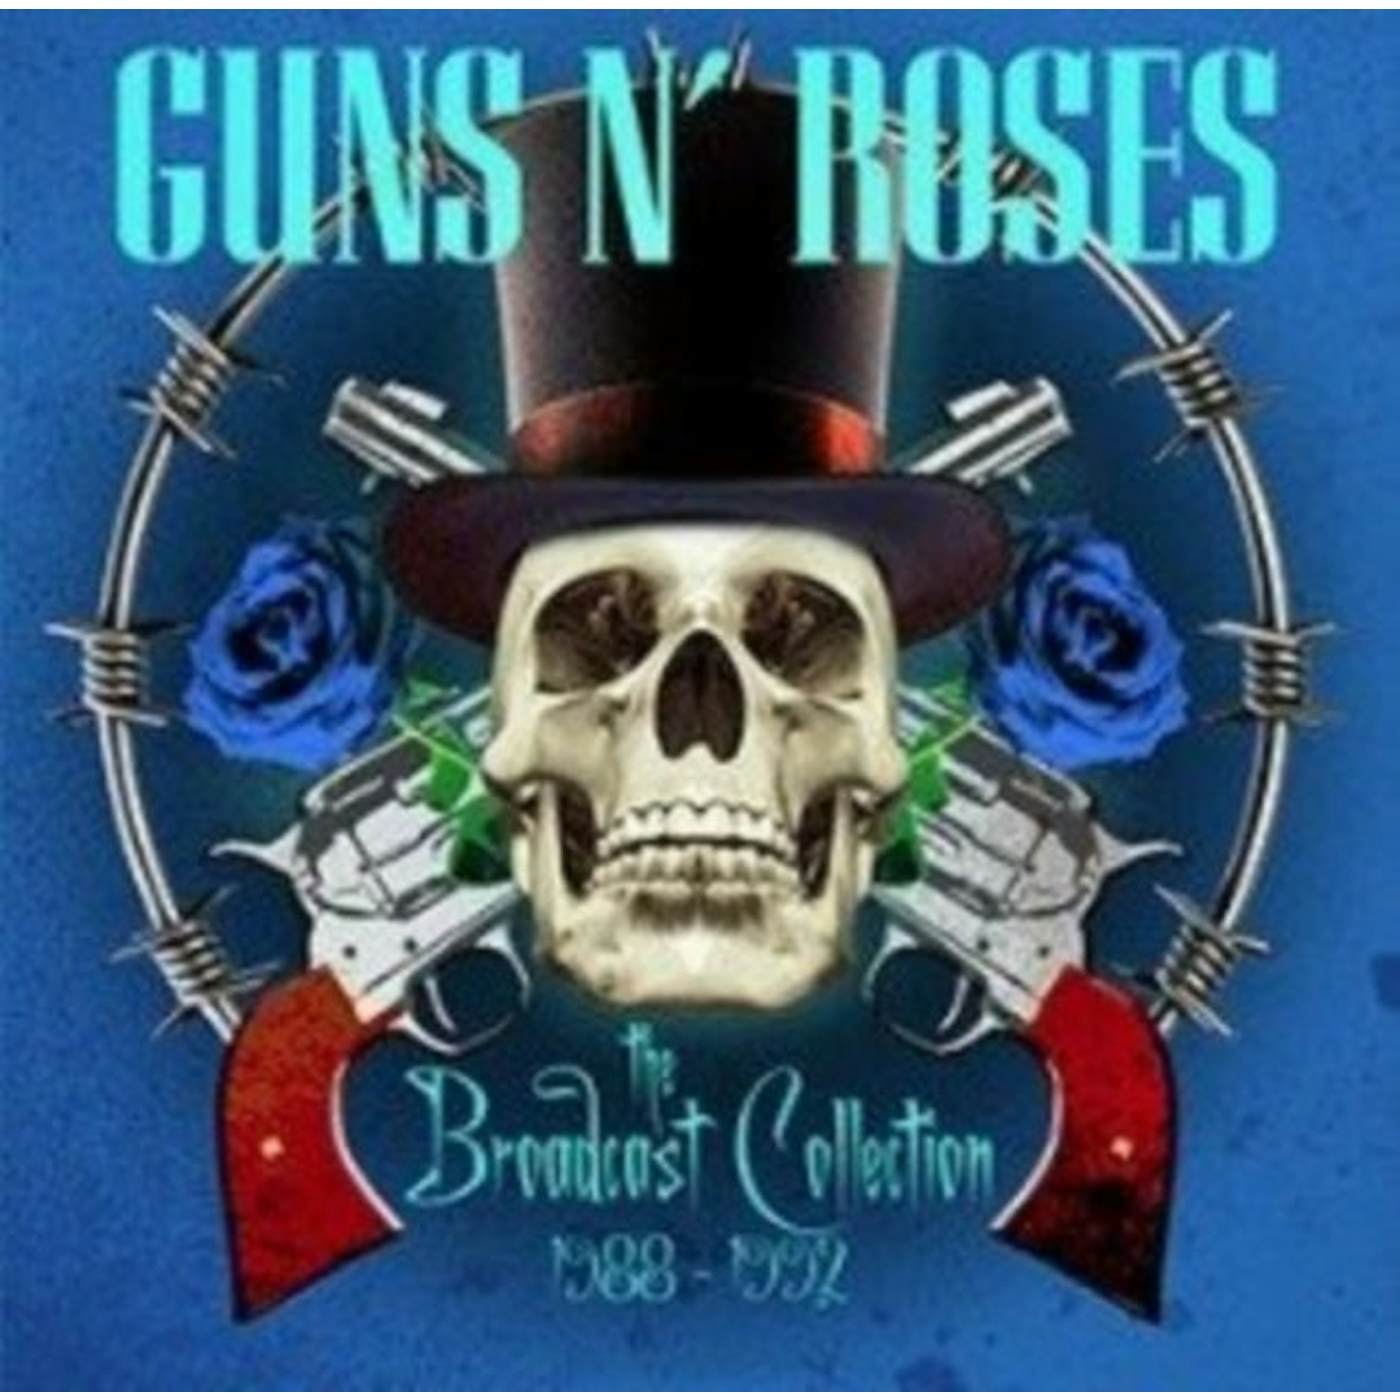 Guns N' Roses CD - The Broadcast Collection 19 88-19 92